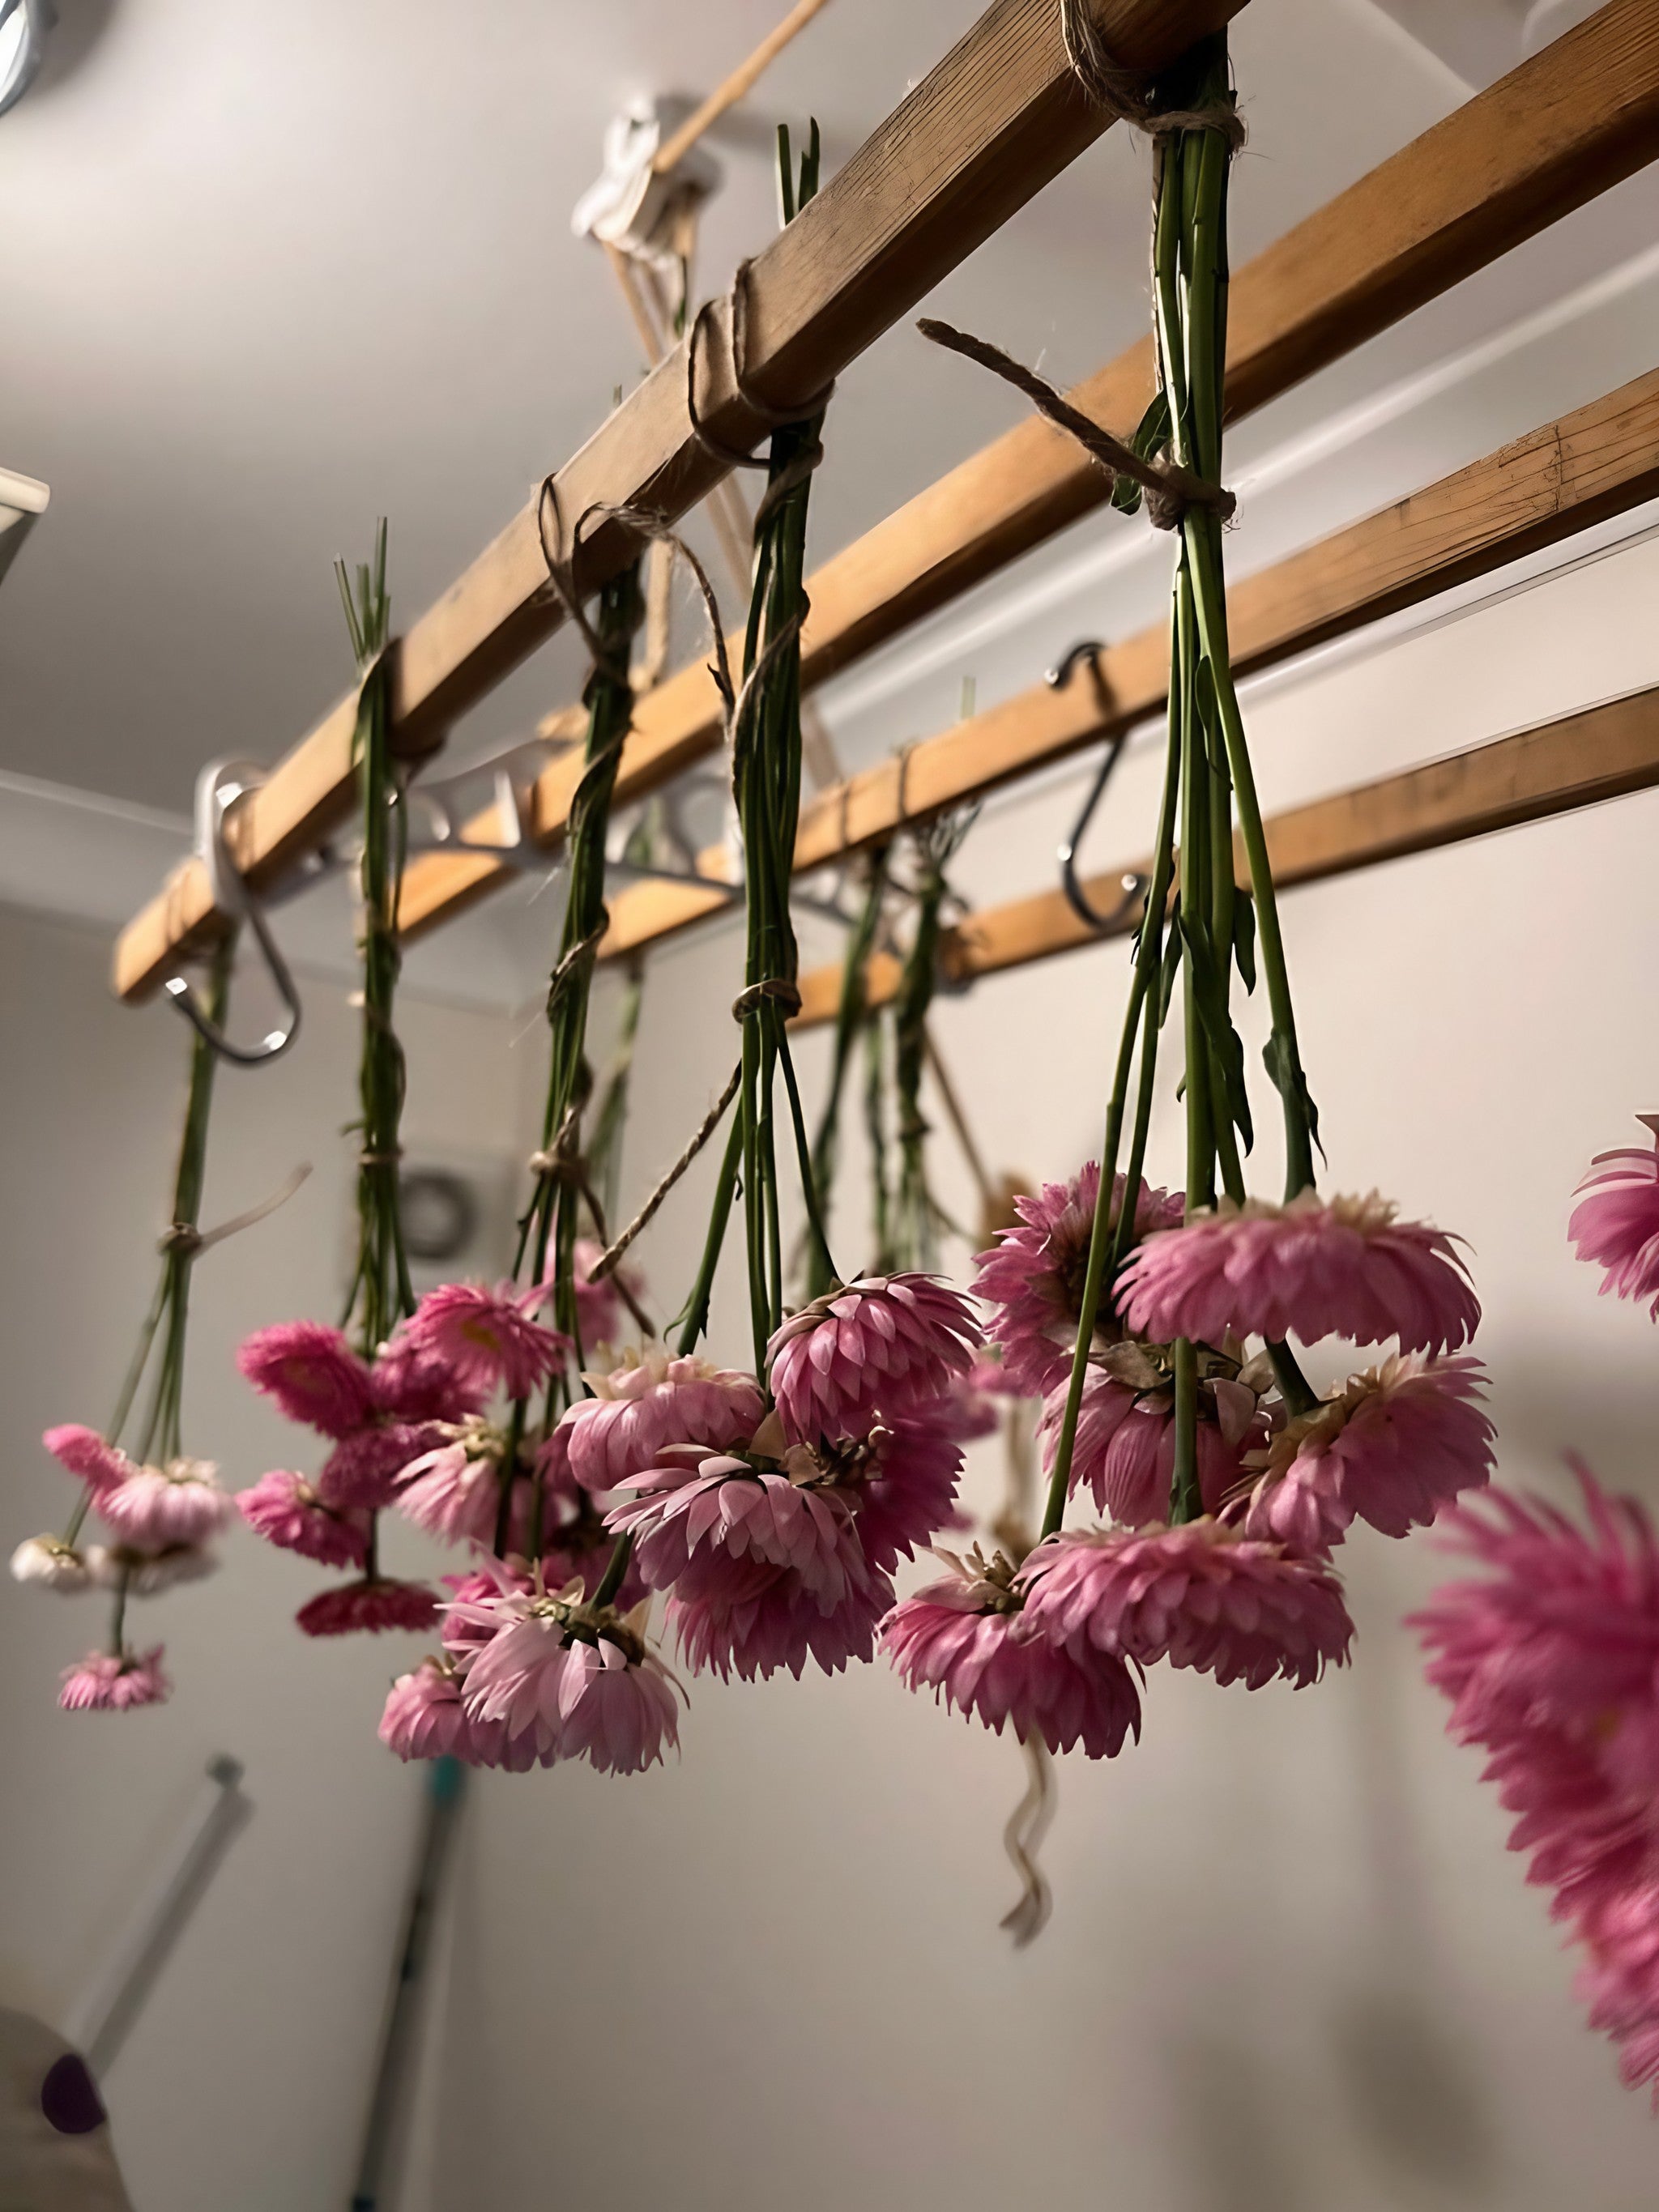 Assortment of pink flowers arranged for drying on a wooden rack